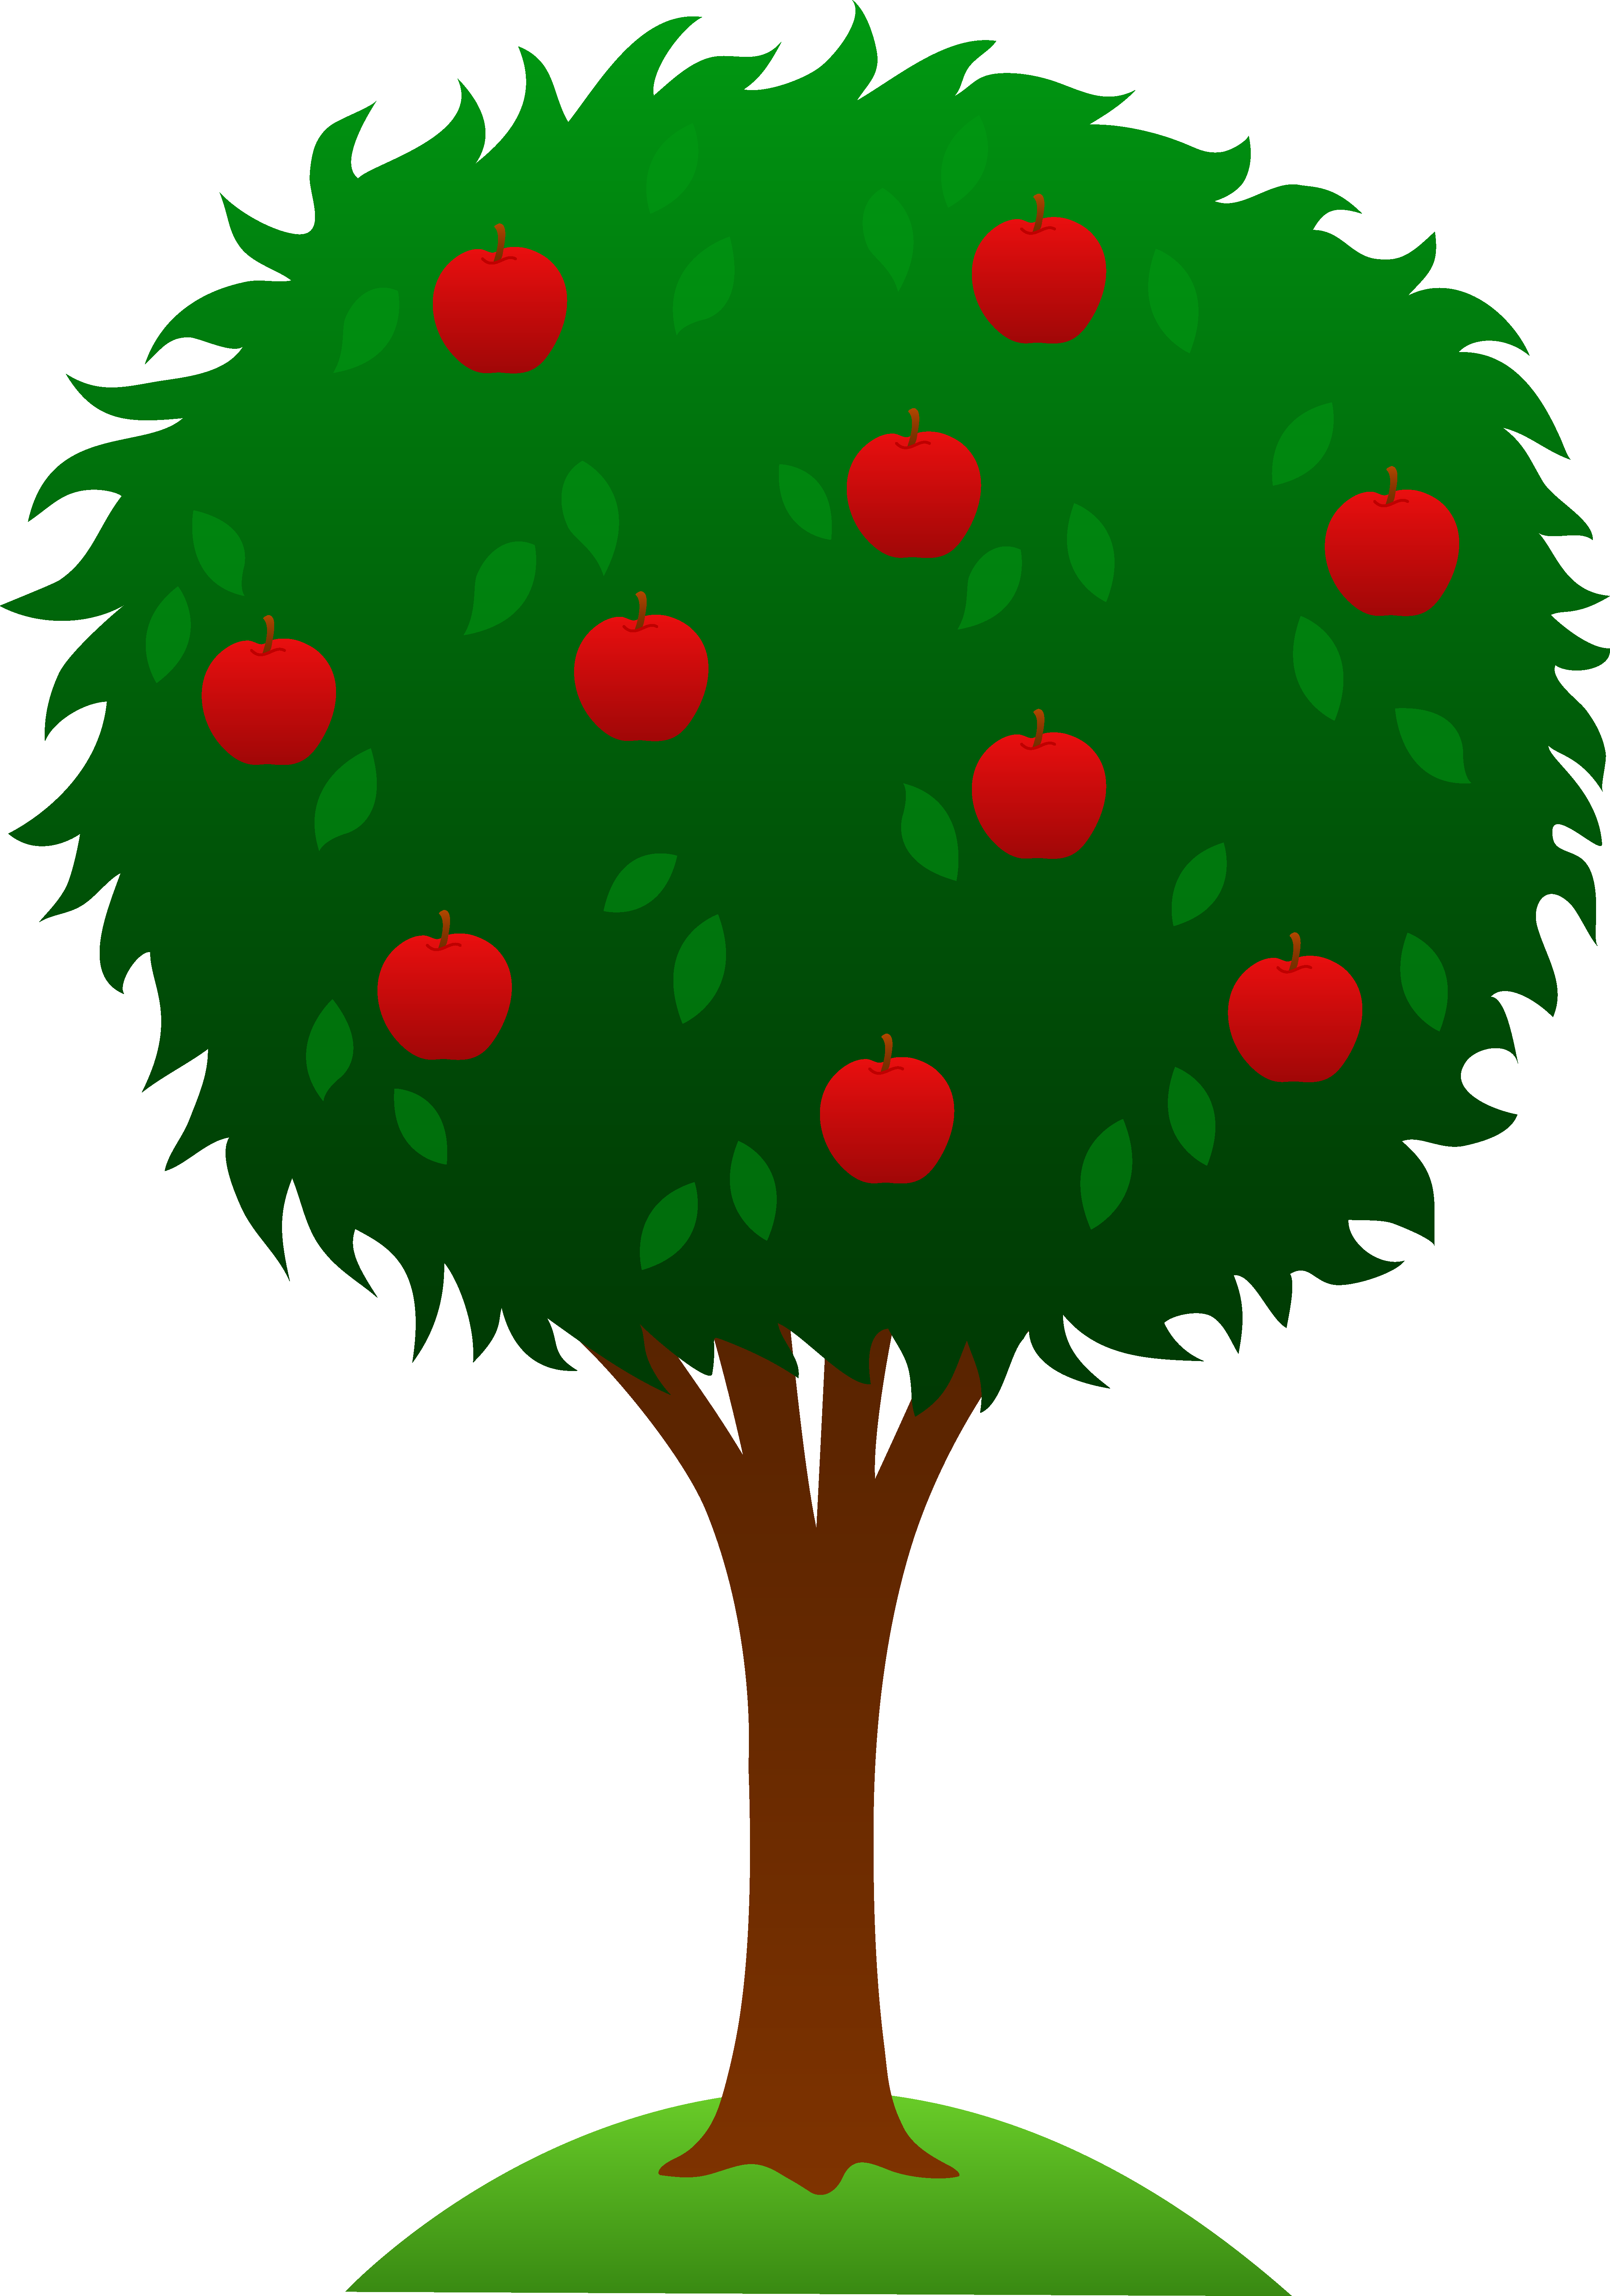 Apple Tree Clipart | Clipart Panda - Free Clipart Images